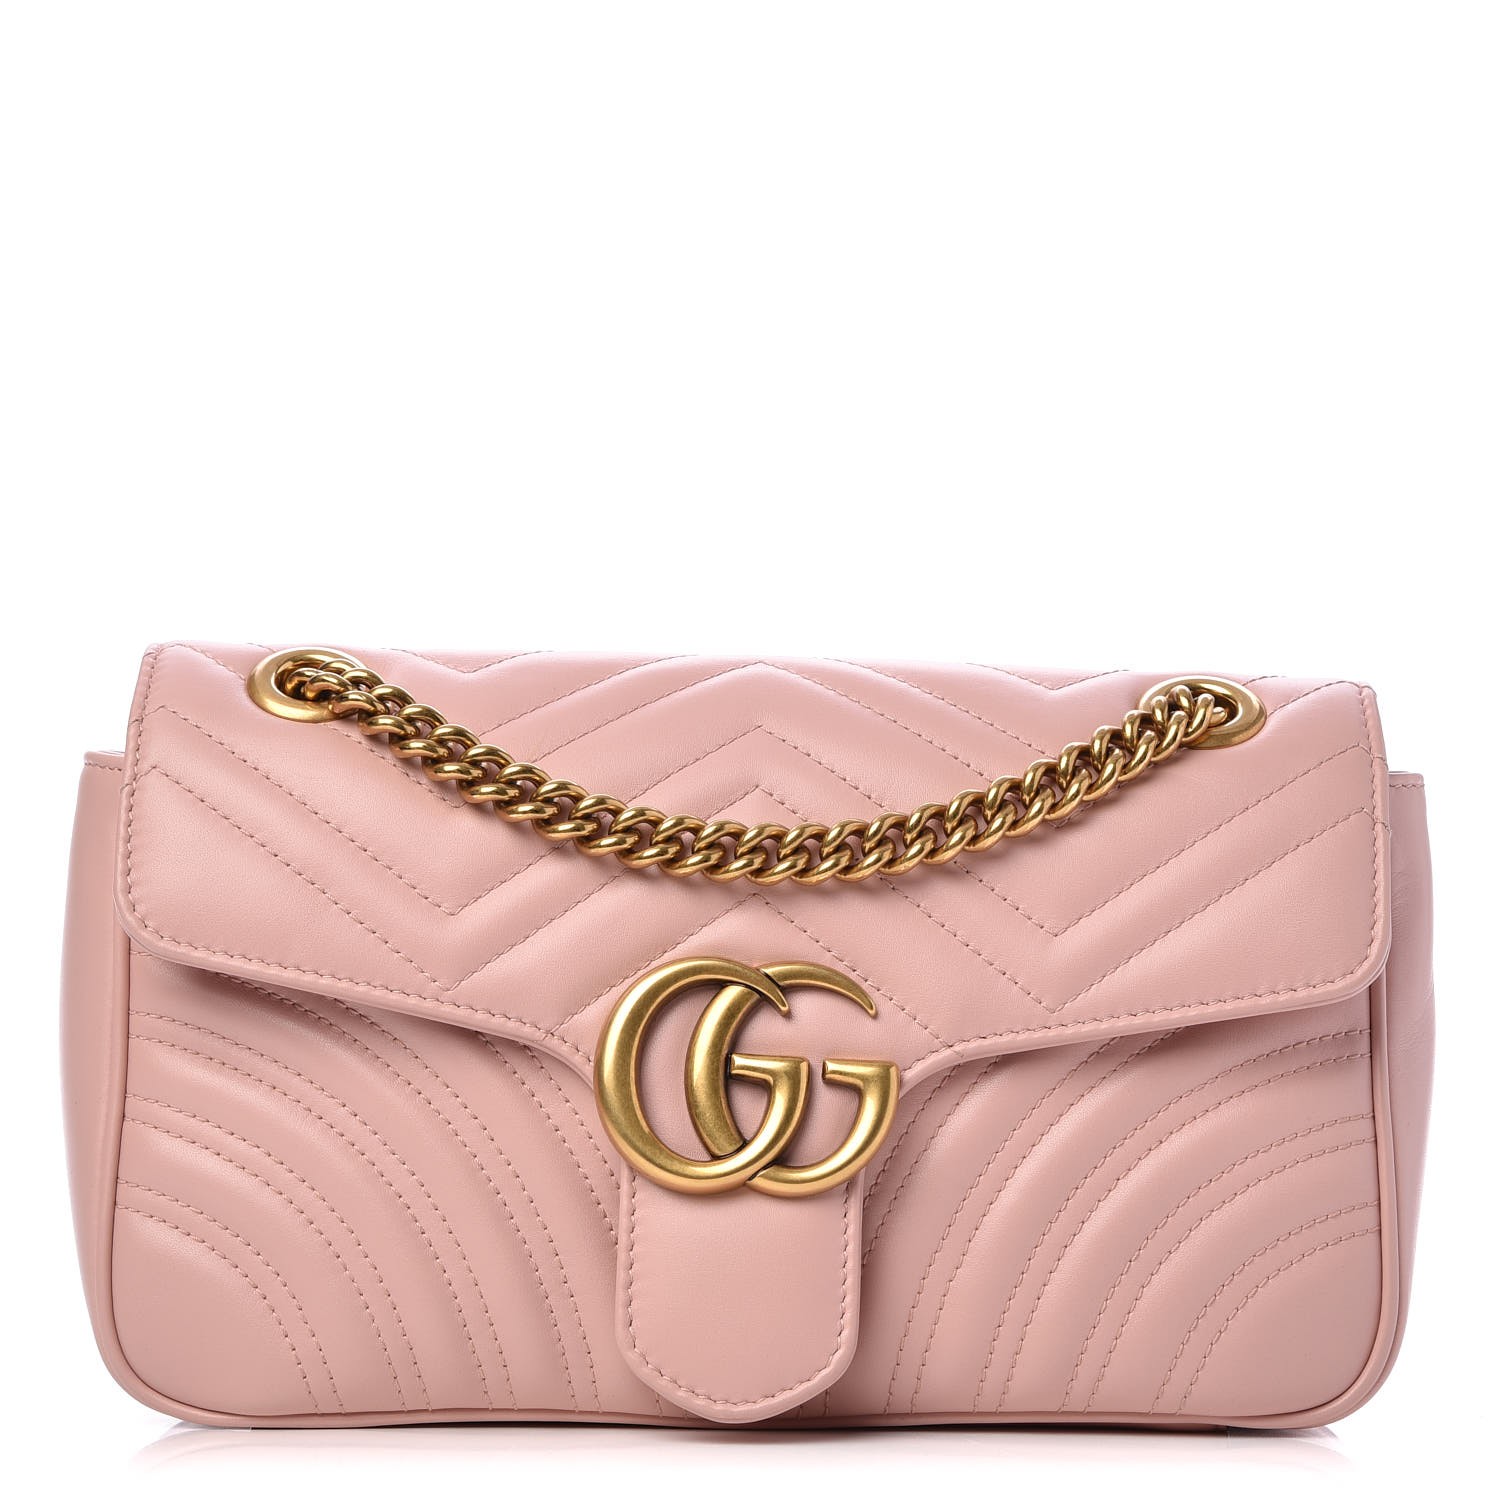 gucci marmont perfect pink